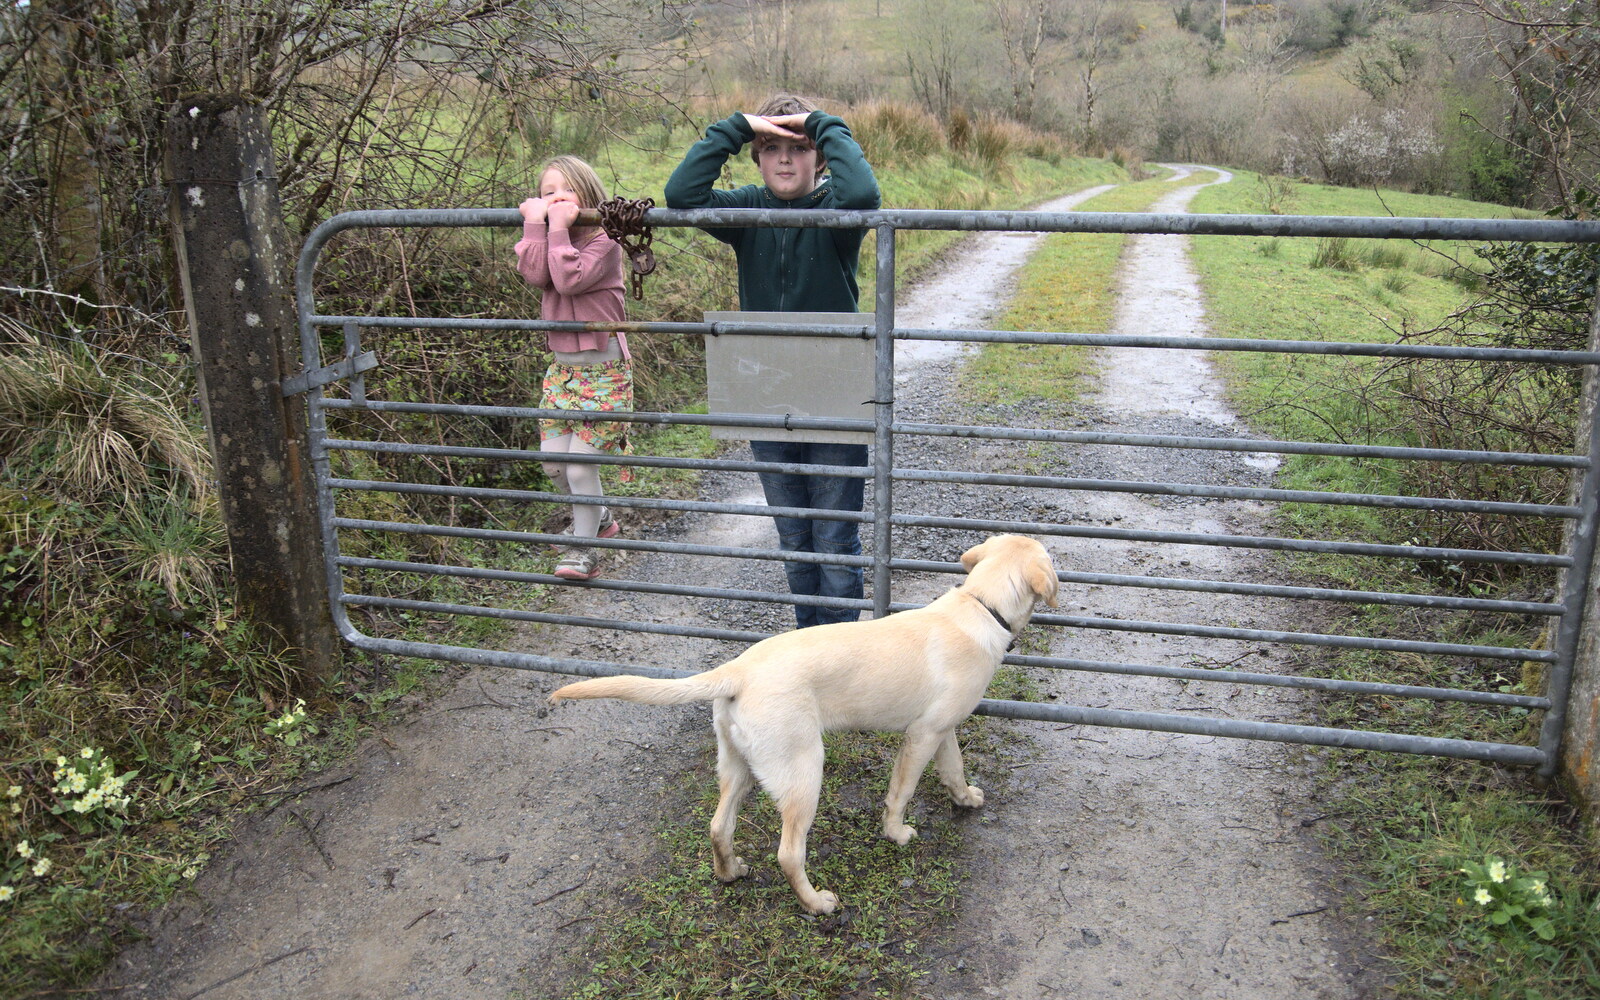 Rachel and Fred on the gate from Manorhamilton and Bundoran, Leitrim and Donegal, Ireland - 16th April 2022